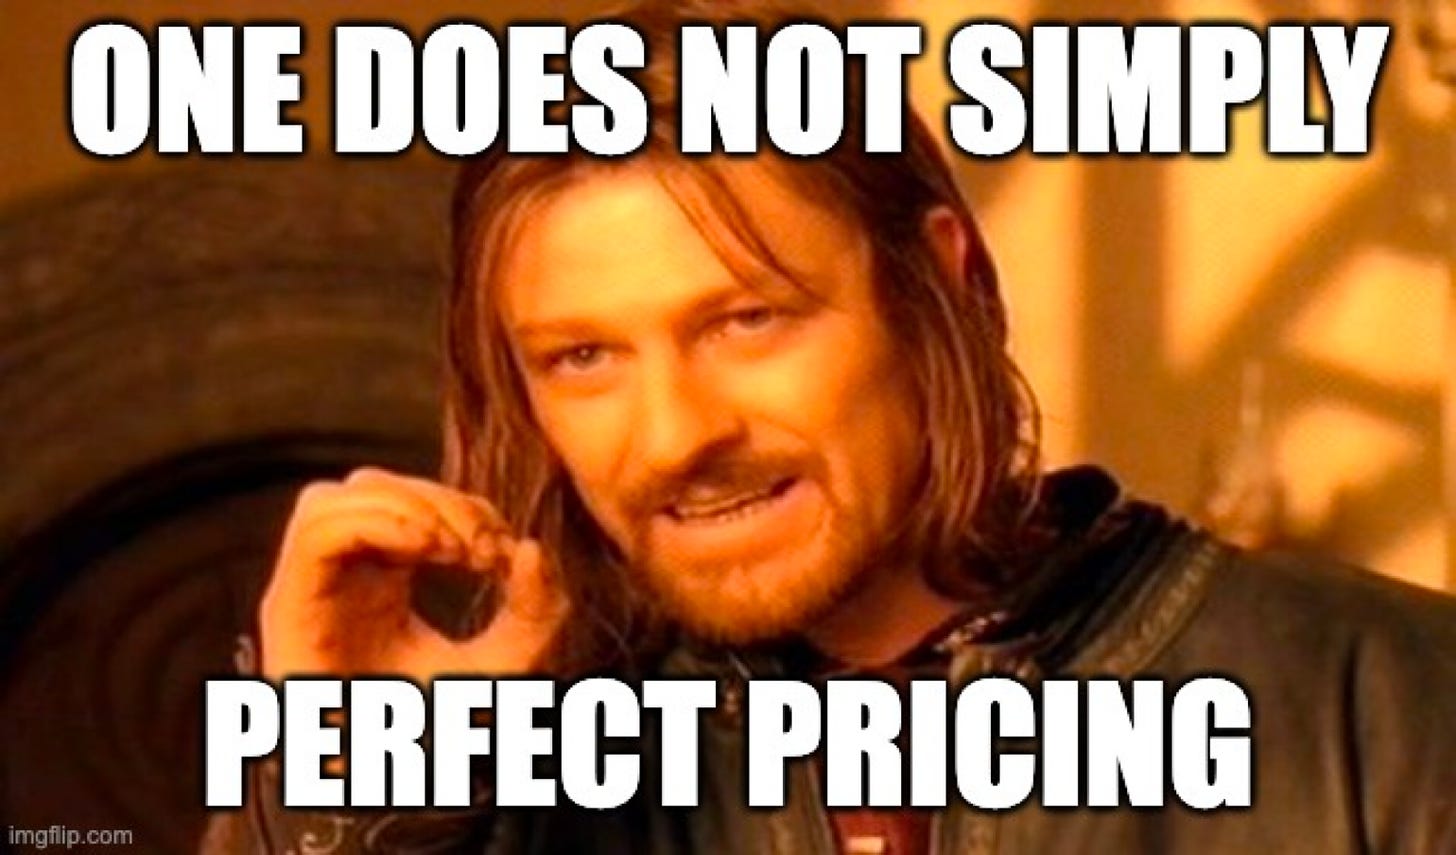 The perfect pricing model doesn't exist